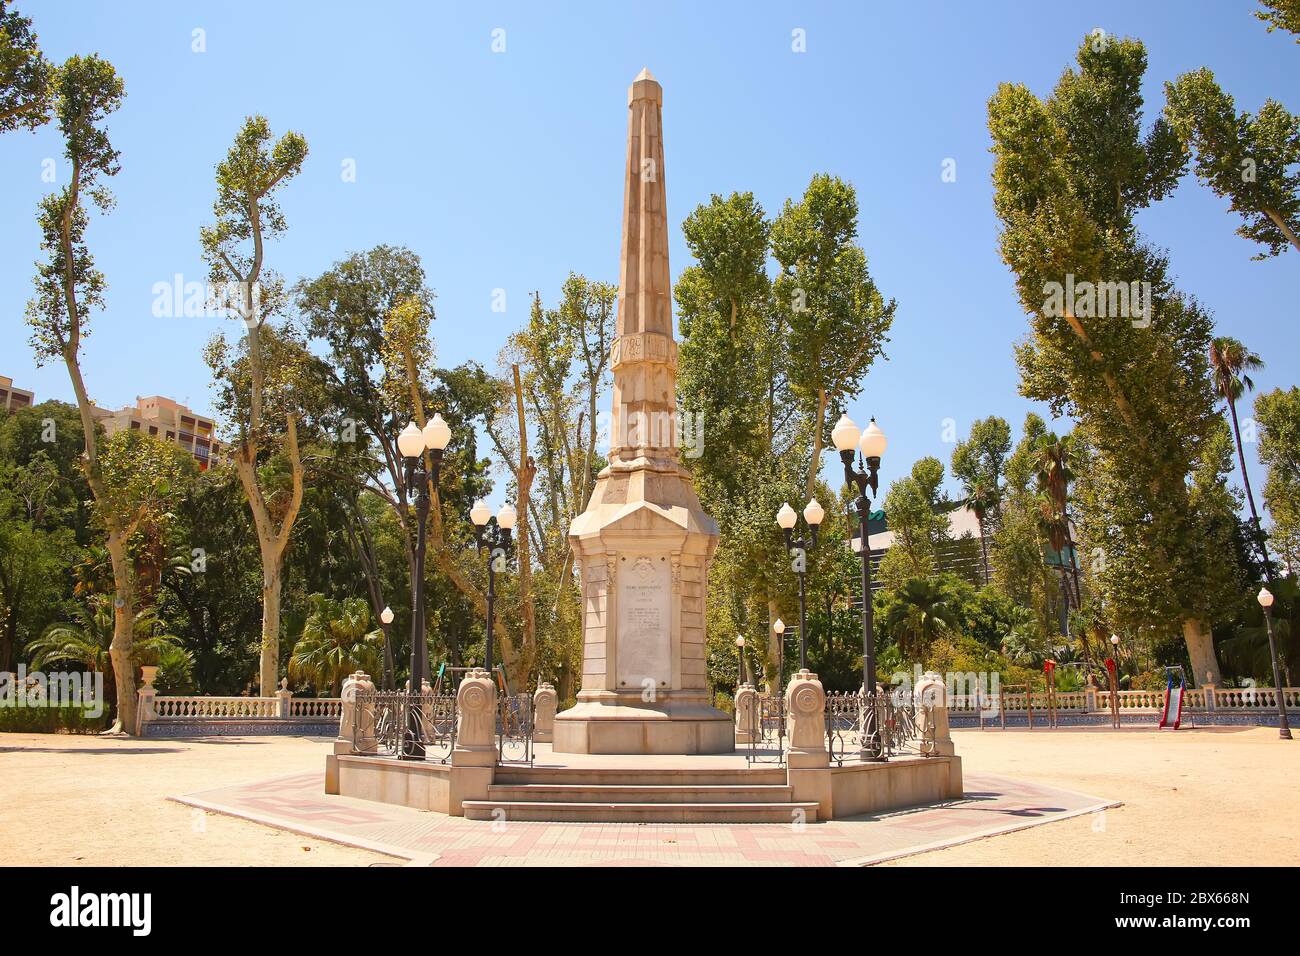 Historic monument in Ribalta Park & gardens which is in the city center downtown area of Castellón, Valencia, Spain. Stock Photo